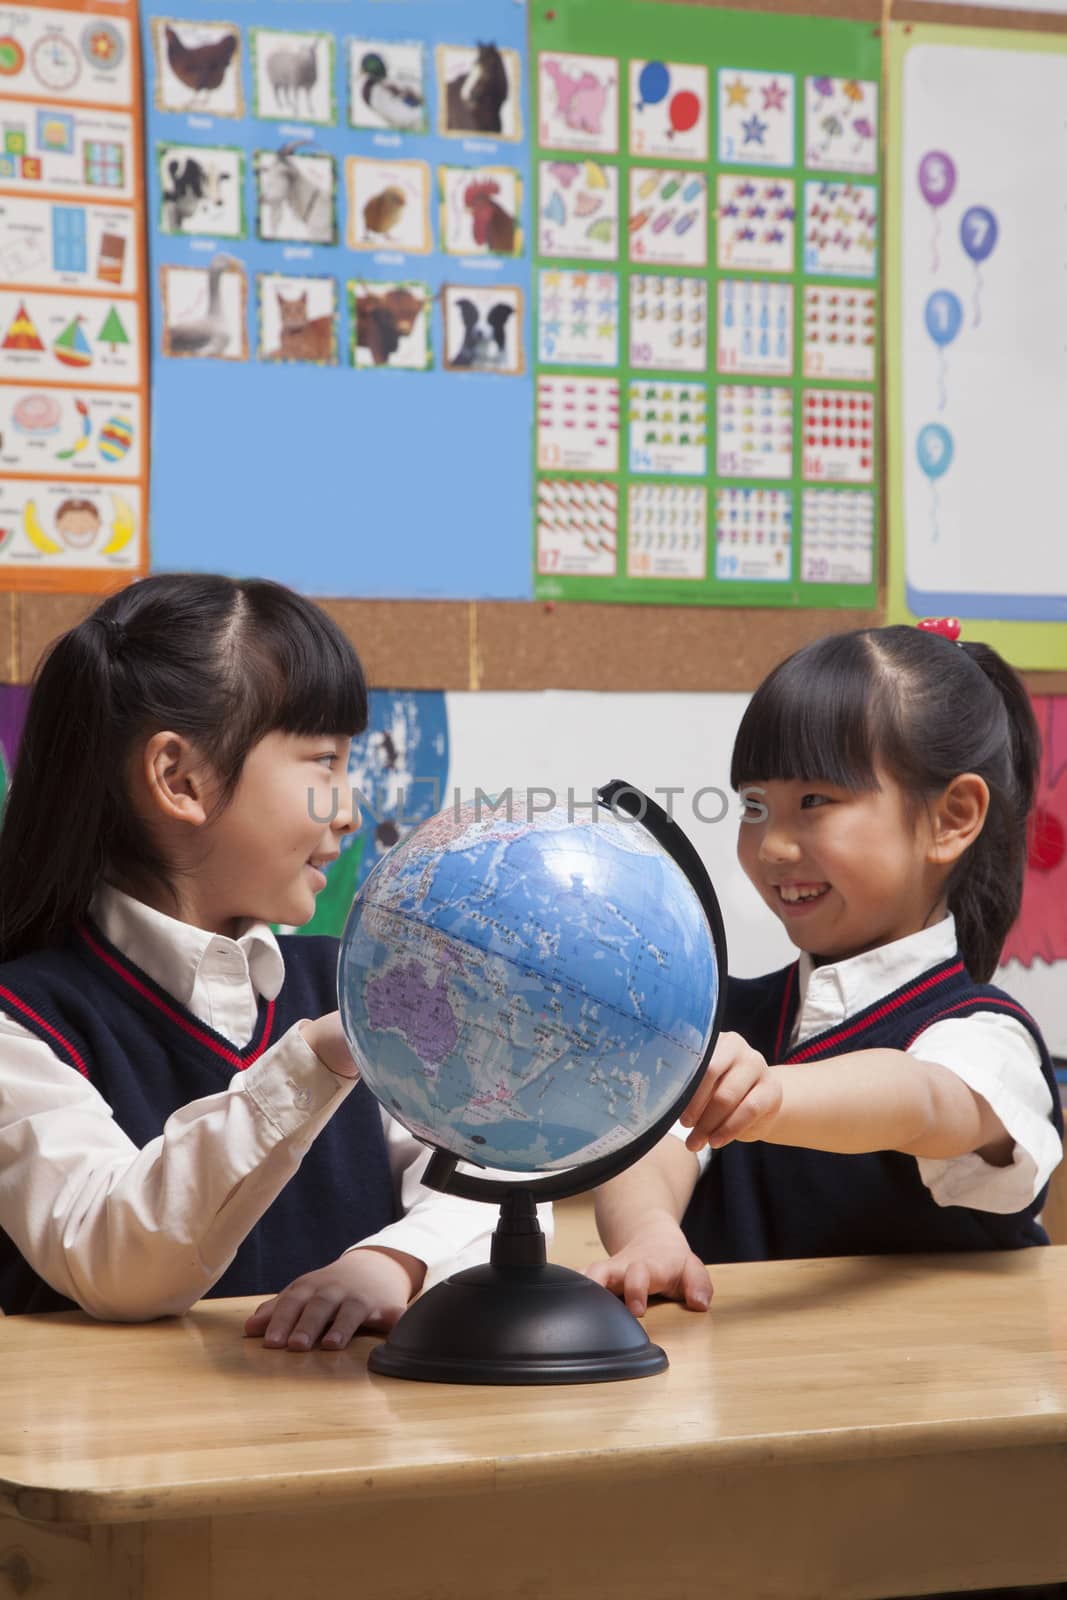 Schoolgirls looking at a globe in the classroom